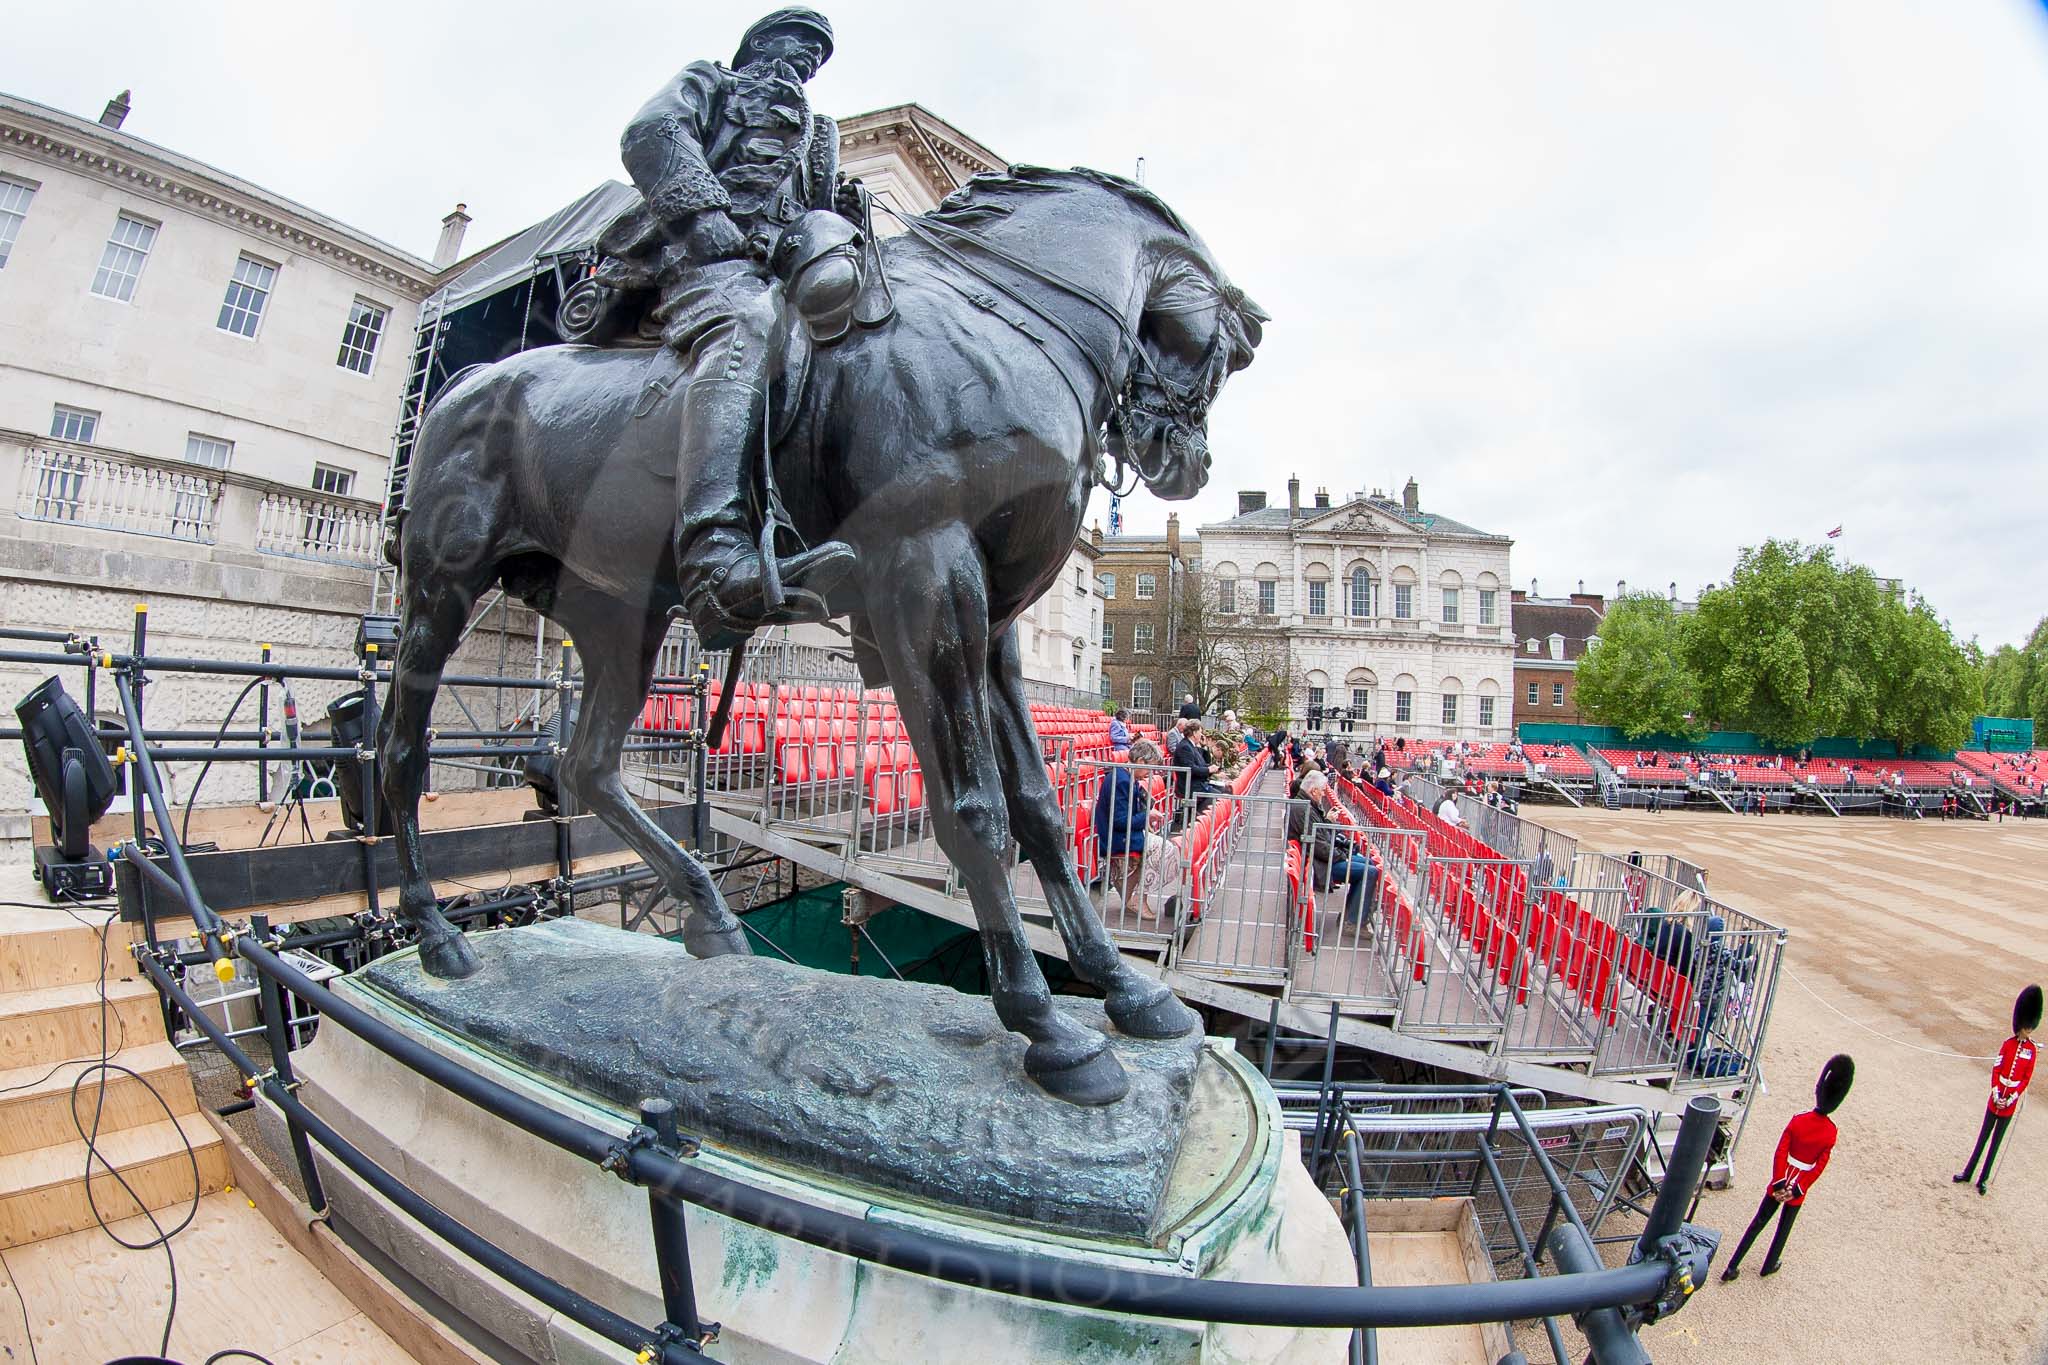 Major General's Review 2013: The equestrian statue of Field Marshal Frederick Sleigh Roberts on the western side of Horse Guards Parade, with the stand for the media built around it..
Horse Guards Parade, Westminster,
London SW1,

United Kingdom,
on 01 June 2013 at 09:27, image #7